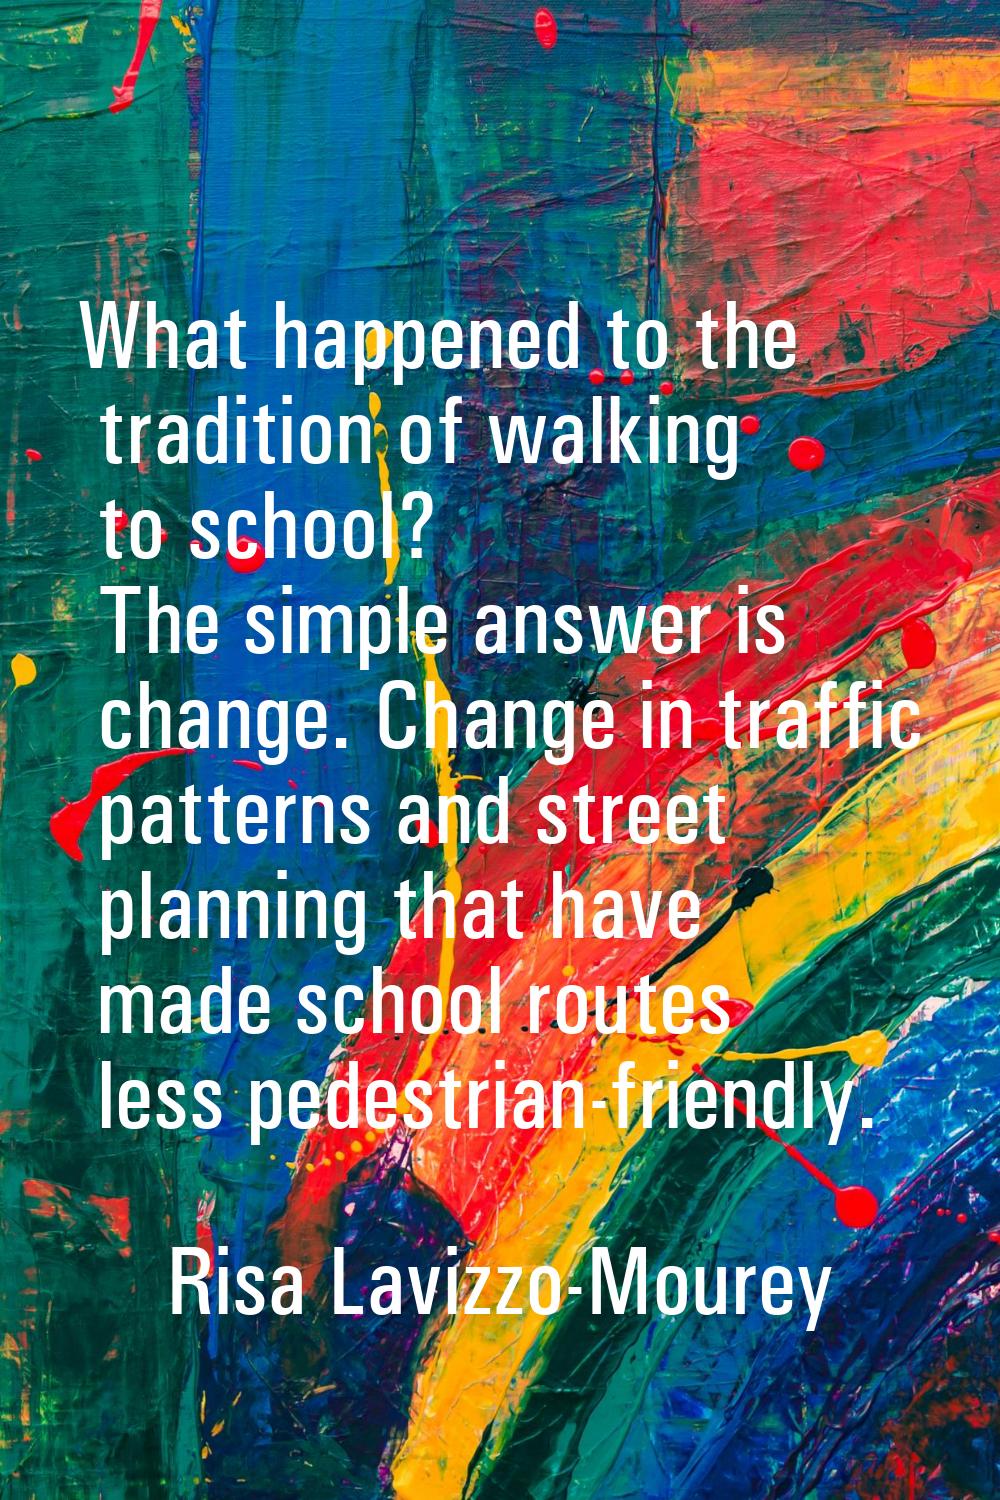 What happened to the tradition of walking to school? The simple answer is change. Change in traffic